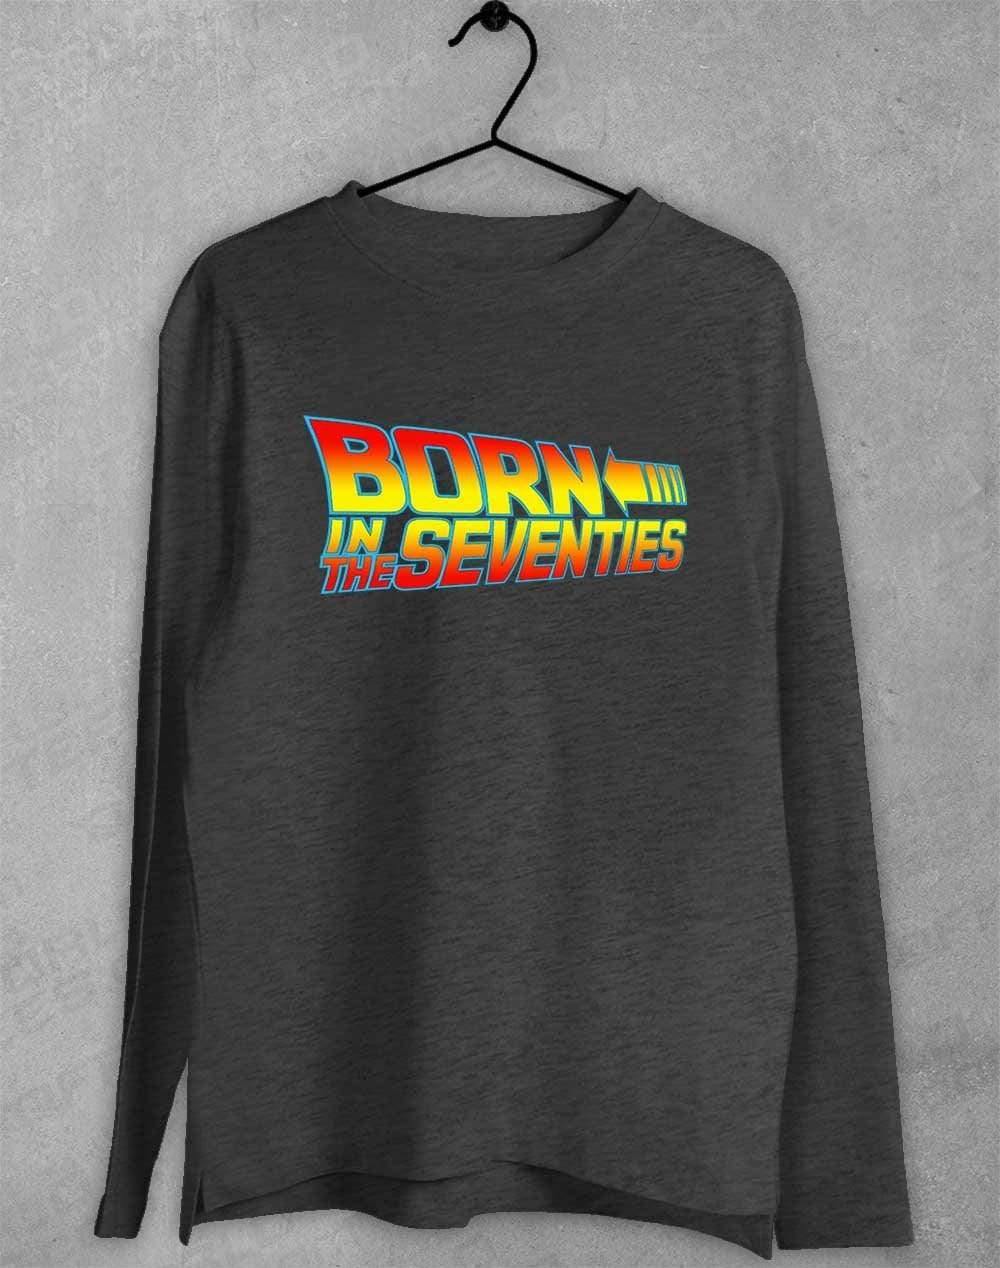 Born in the... (CHOOSE YOUR DECADE!) Long Sleeve T-Shirt 1970s - Dark Heather / S  - Off World Tees